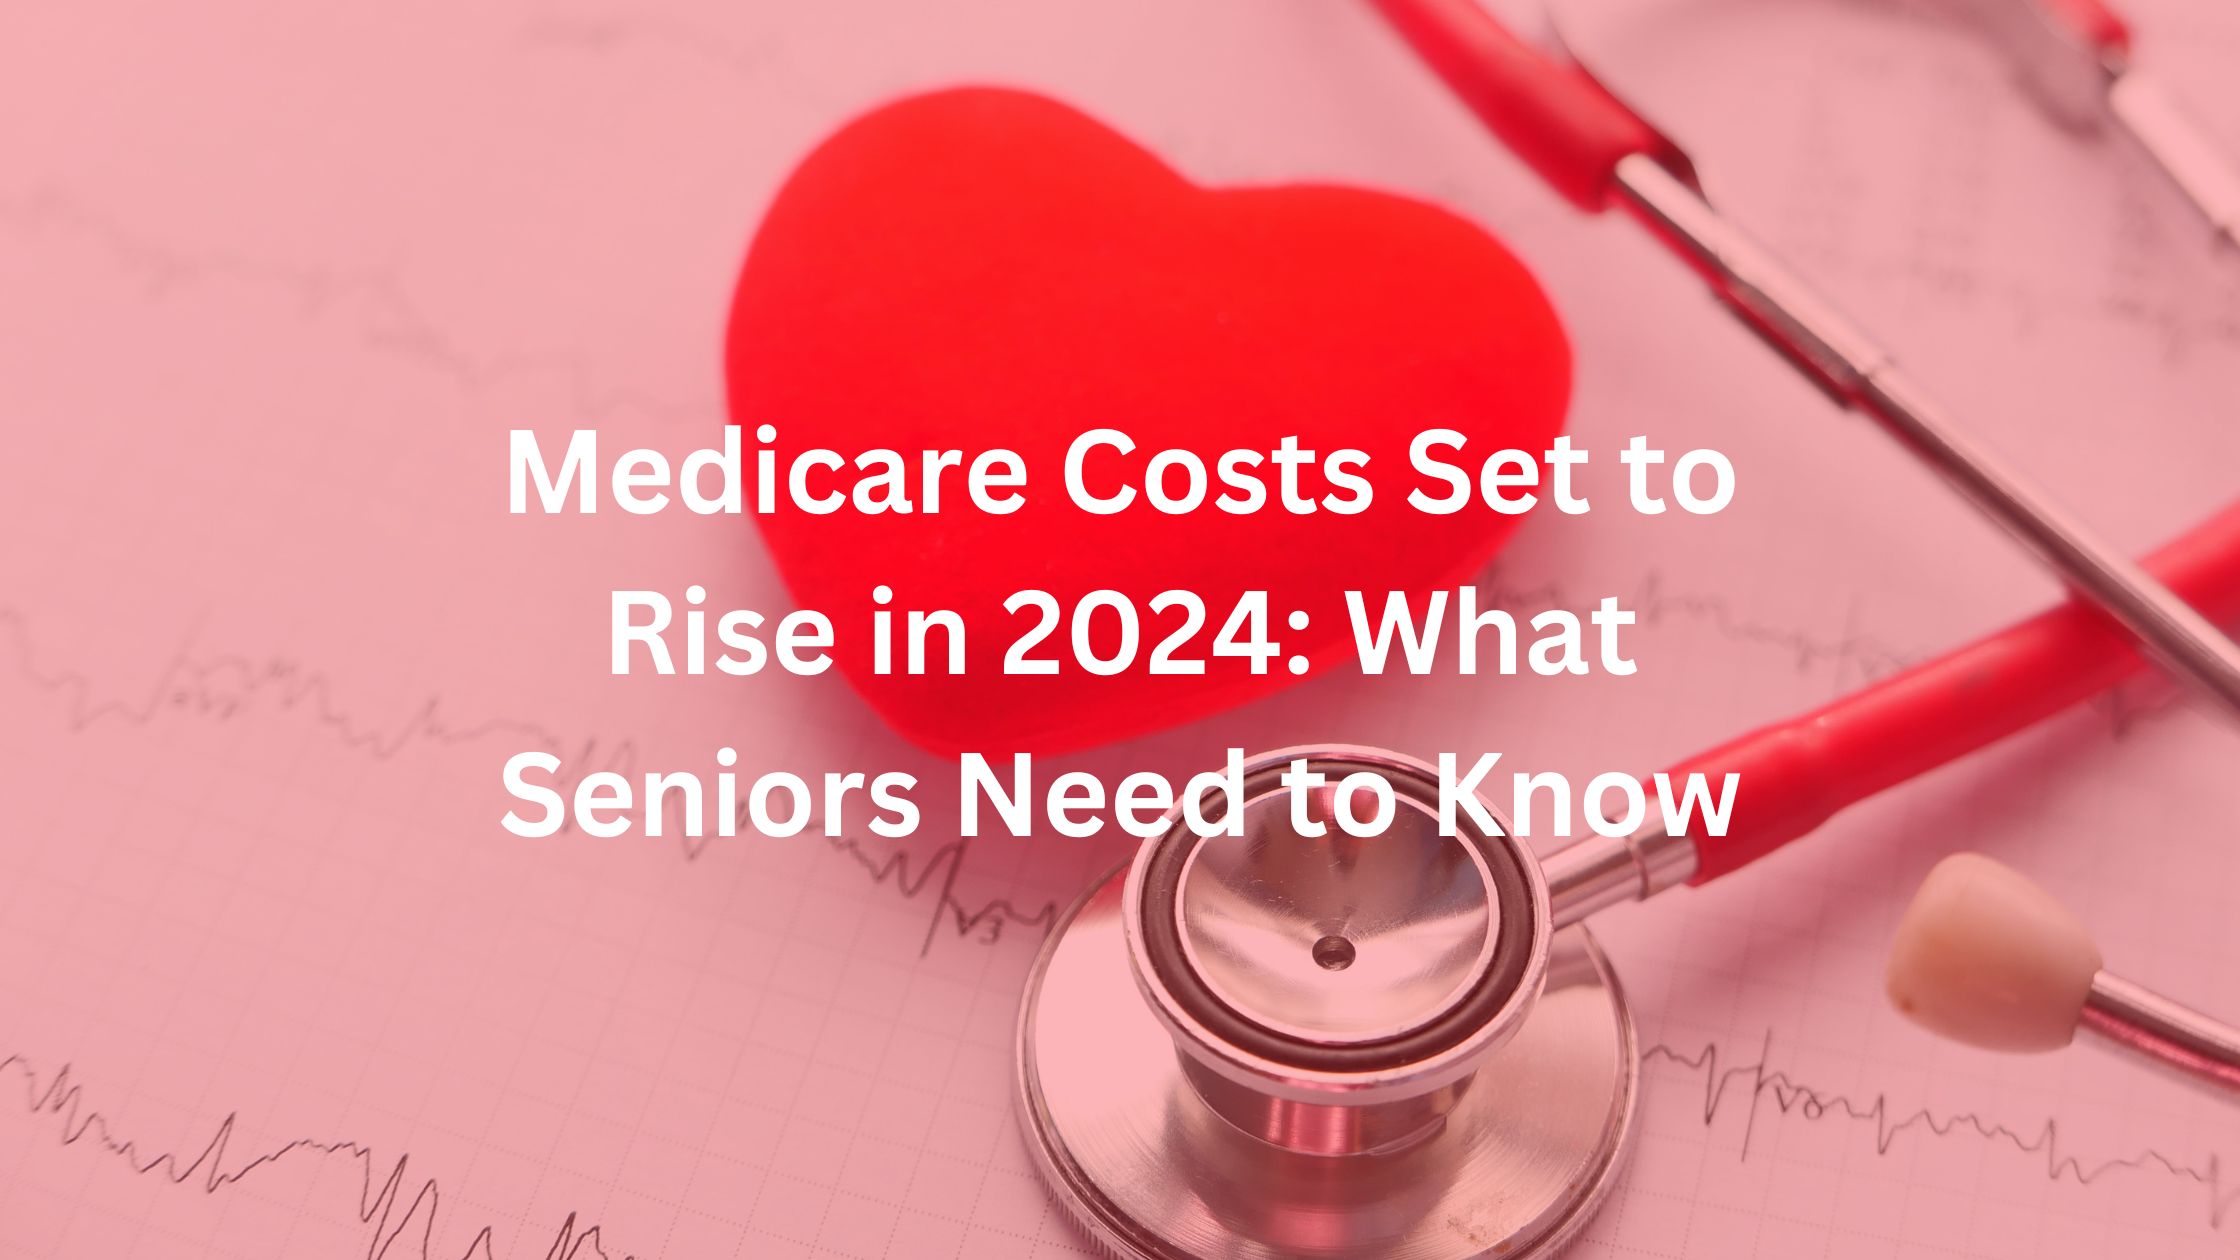 Medicare Costs Set to Rise in 2024: What Seniors Need to Know